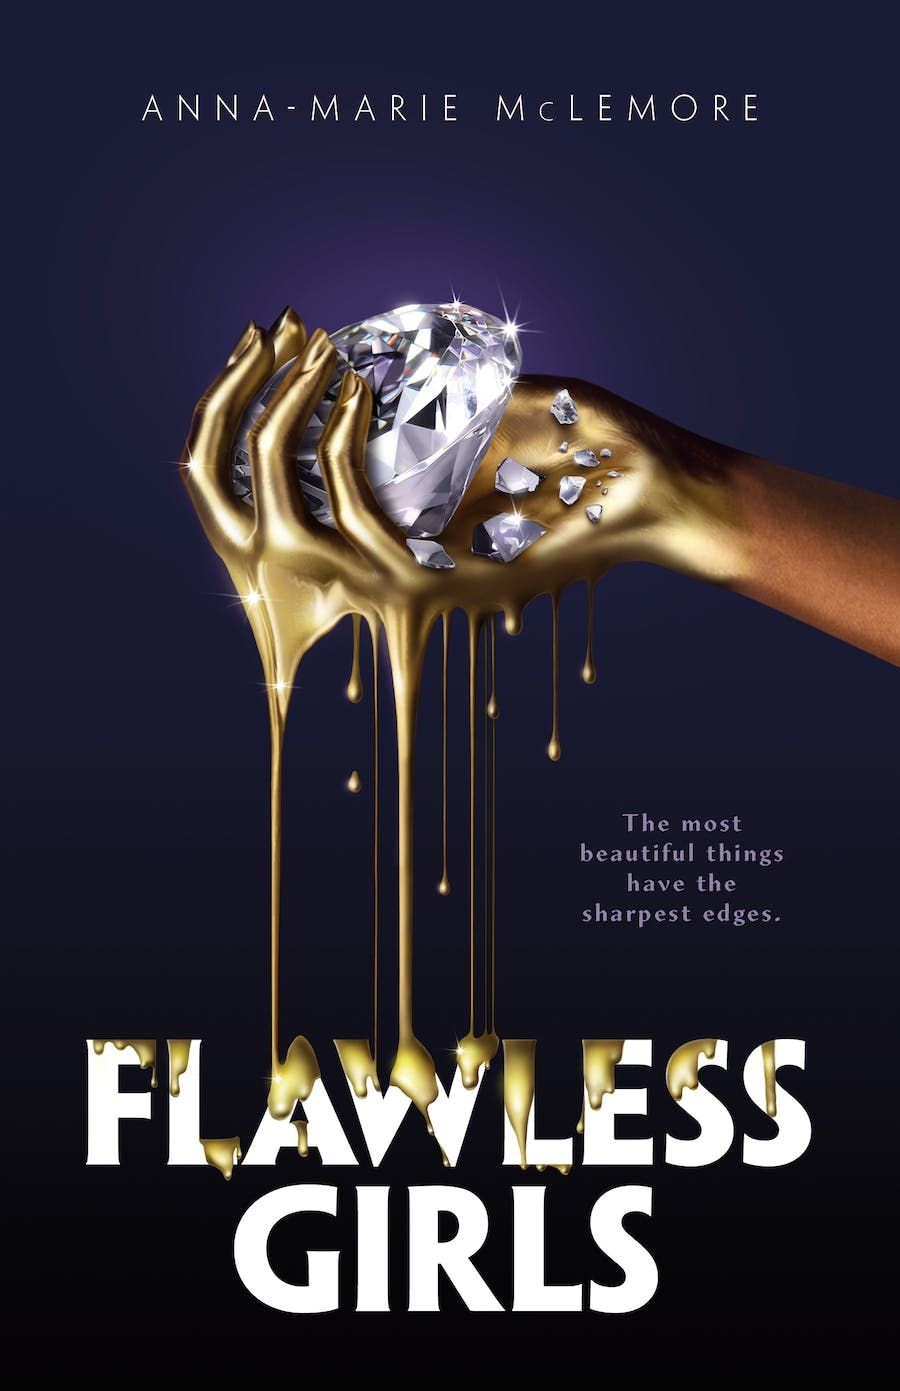 flawless girls book cover